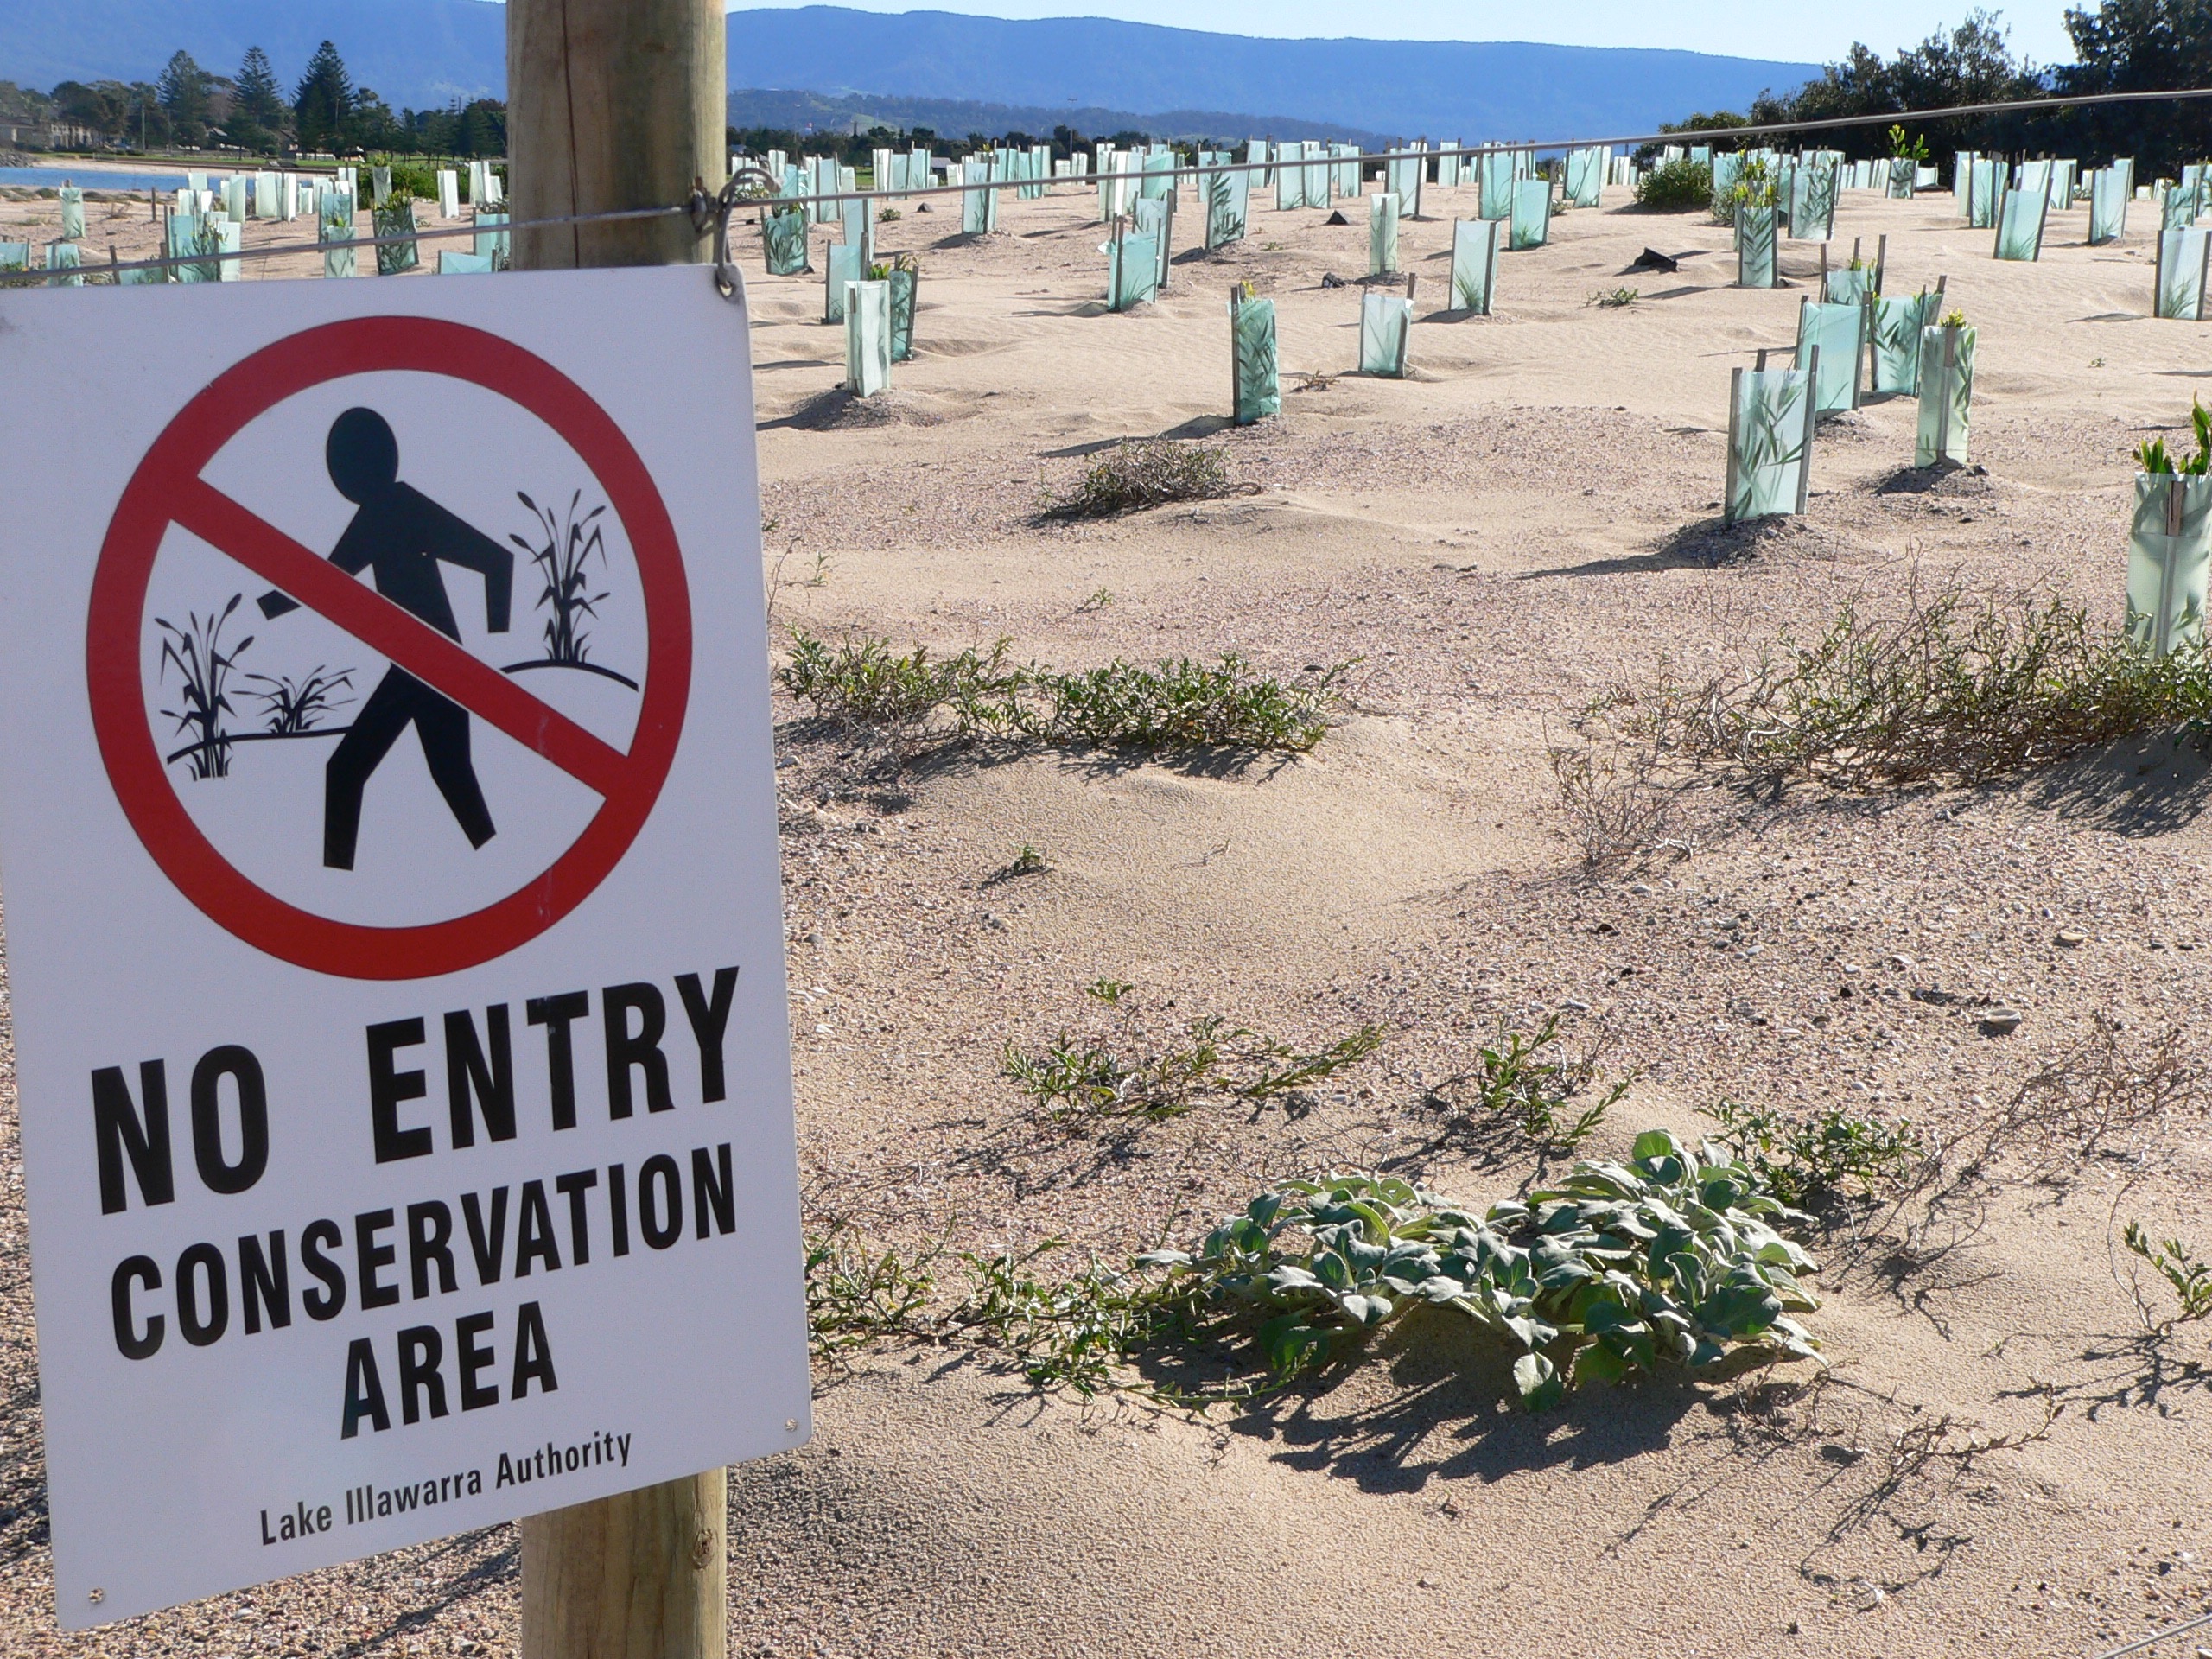 a sign reads no entry conservation area Lake Illawarra Authority. Sand dunes have small plants placed in rows and protected by stakes and surrounded by netting.